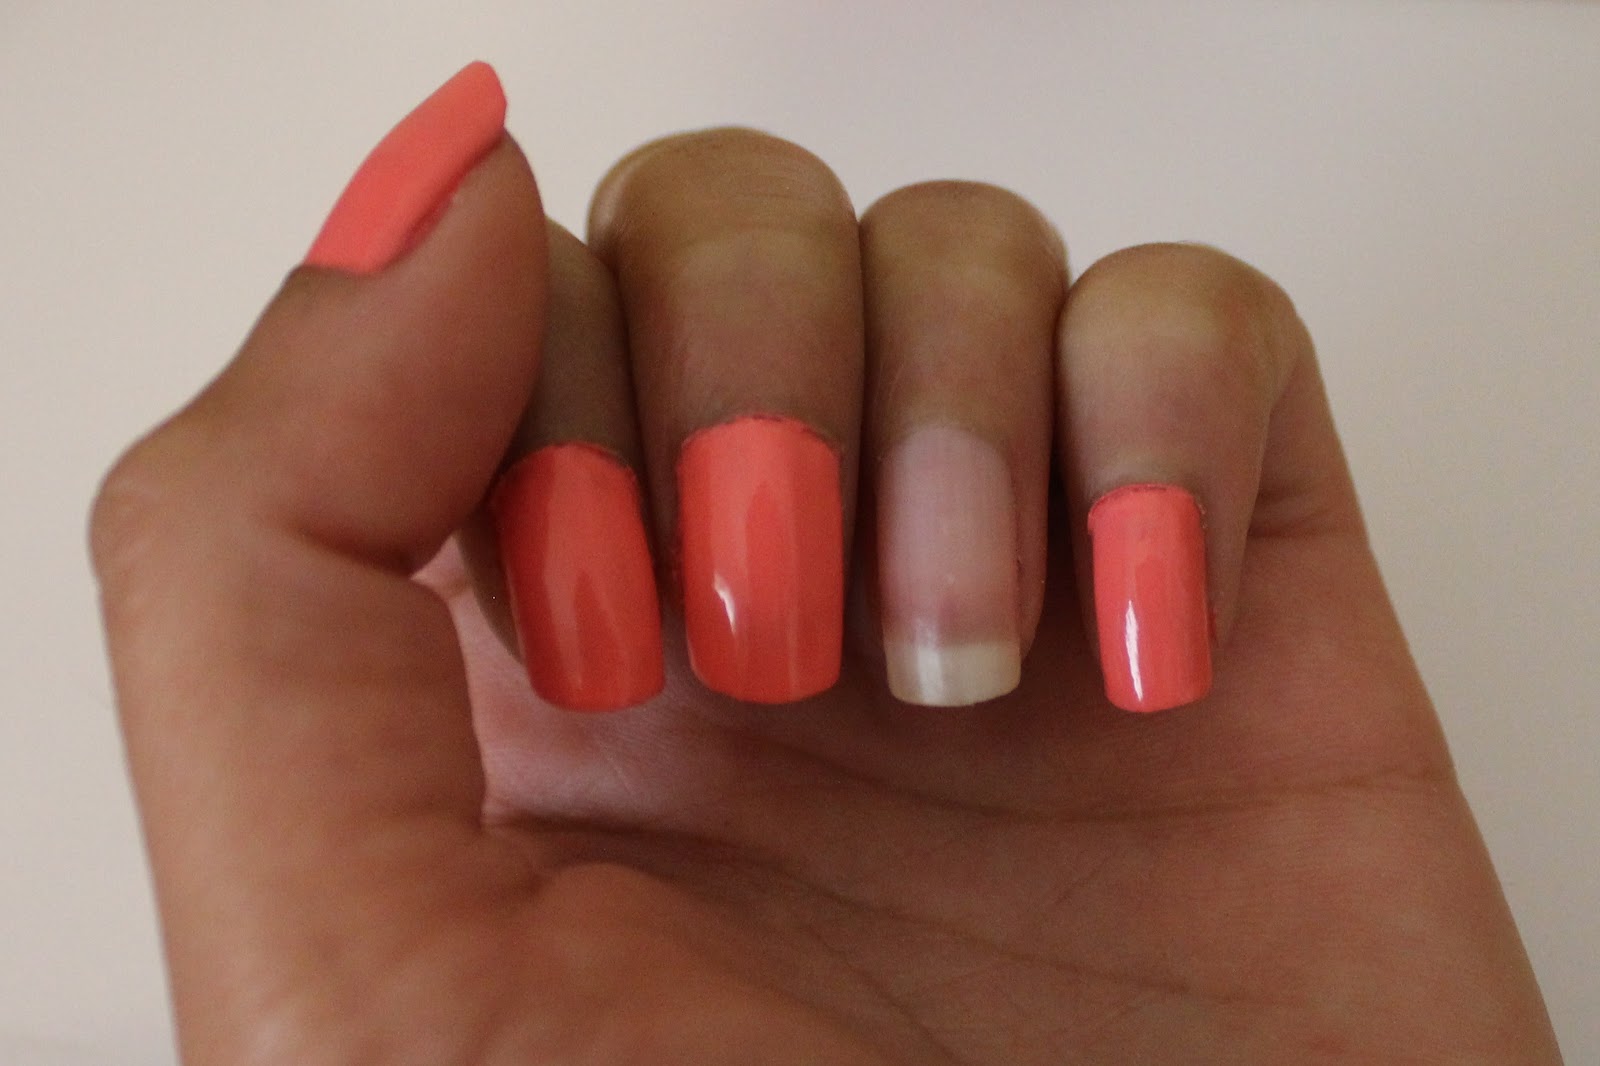 7. Butter London Nail Lacquer in "Trout Pout" - wide 8